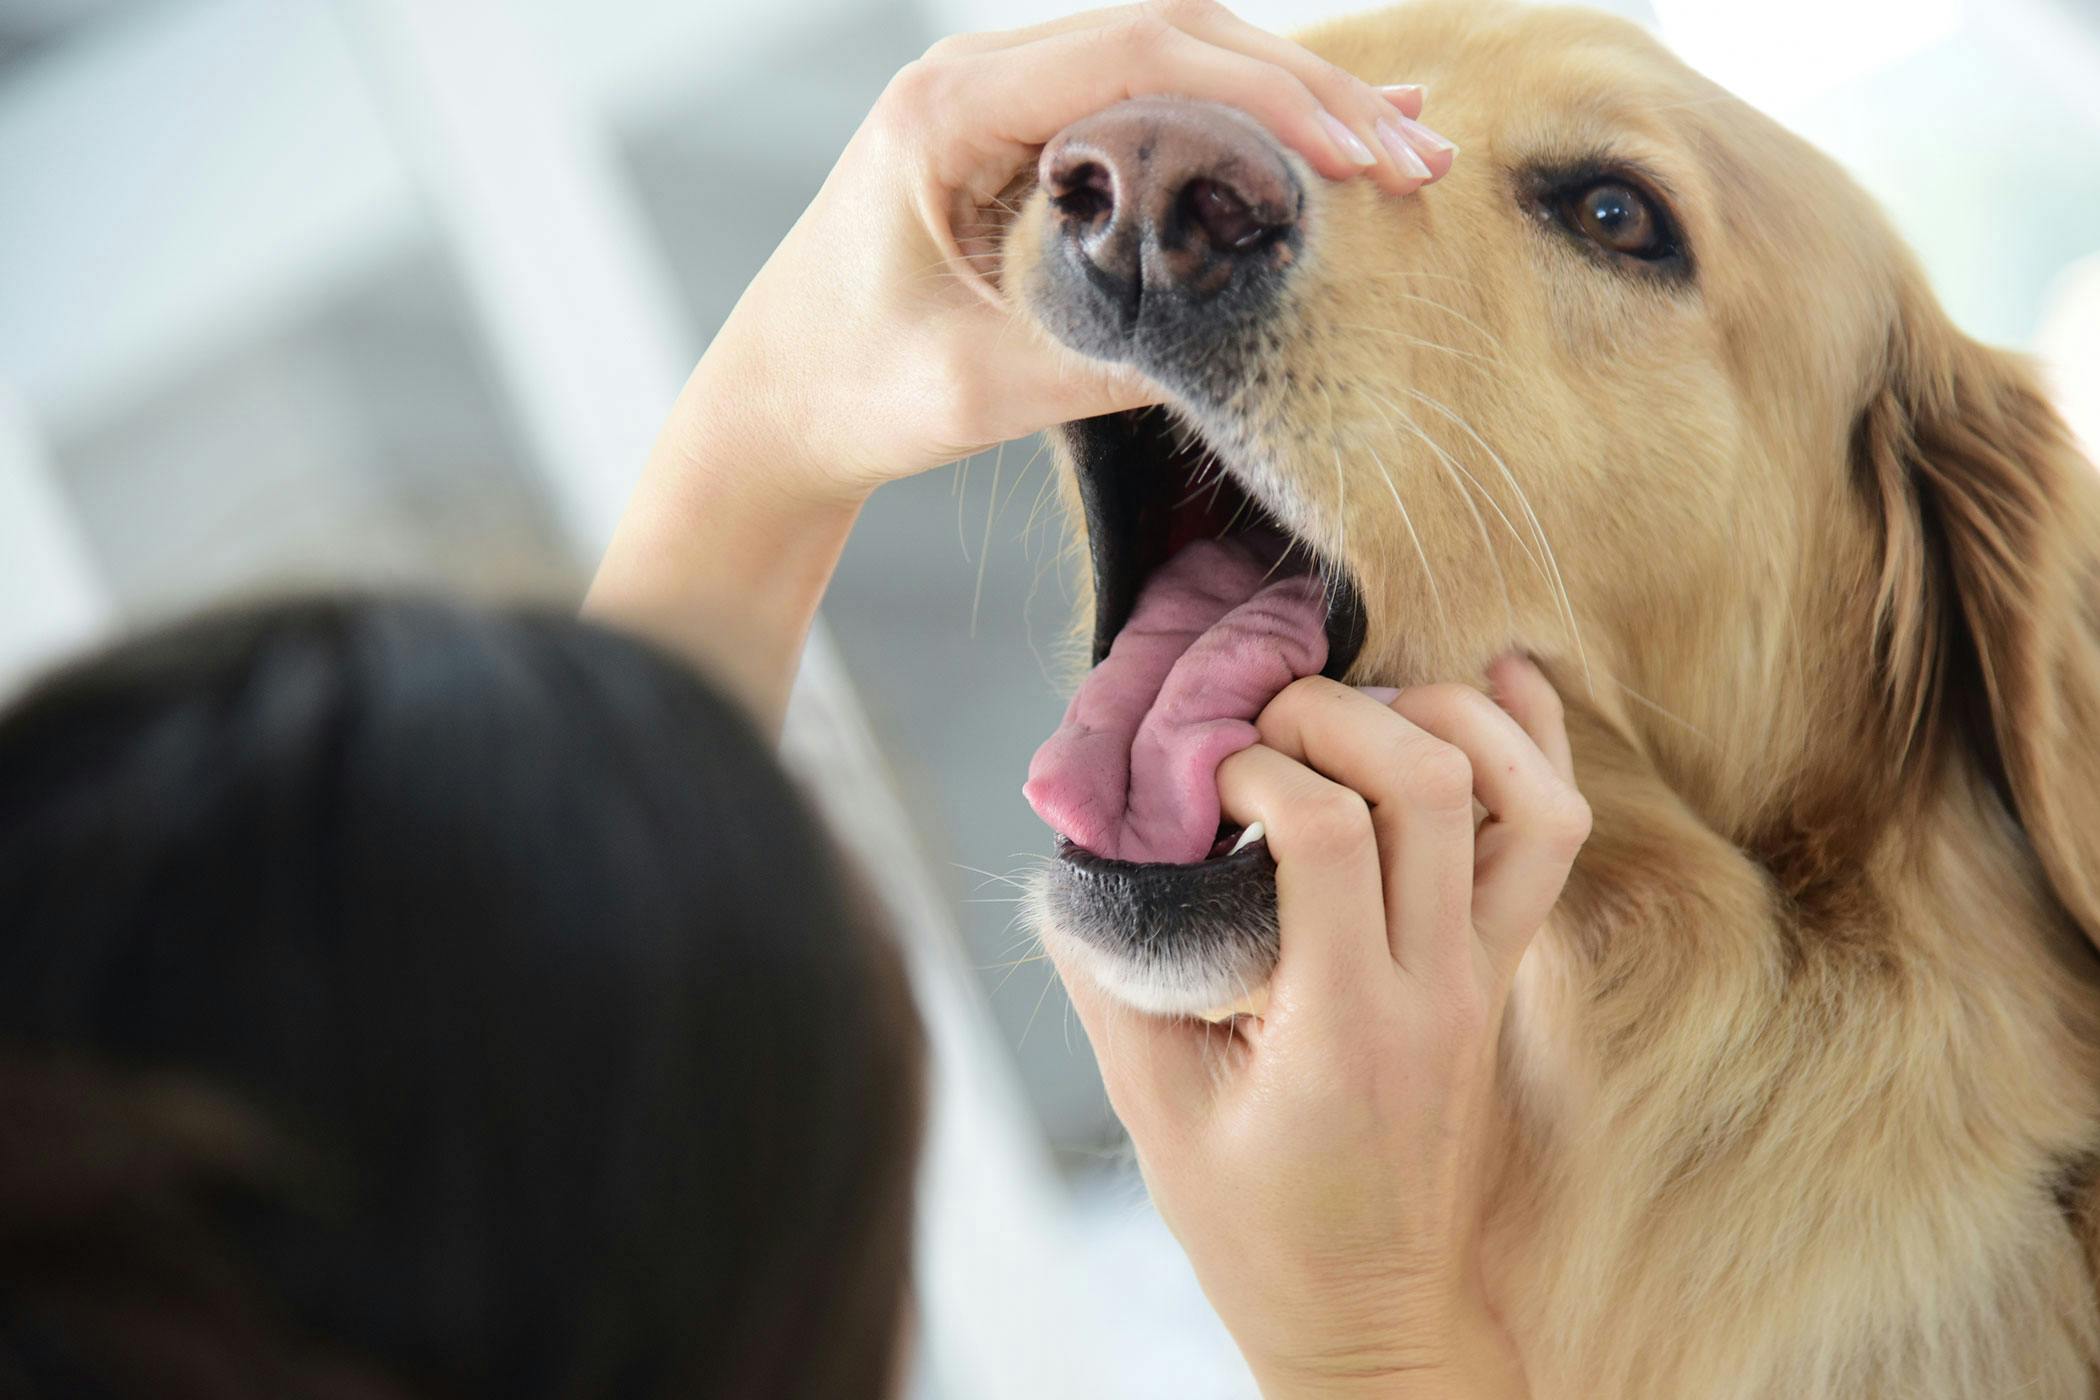 Types Of Cancer In Dogs Cancer Signs Dogs Tumors